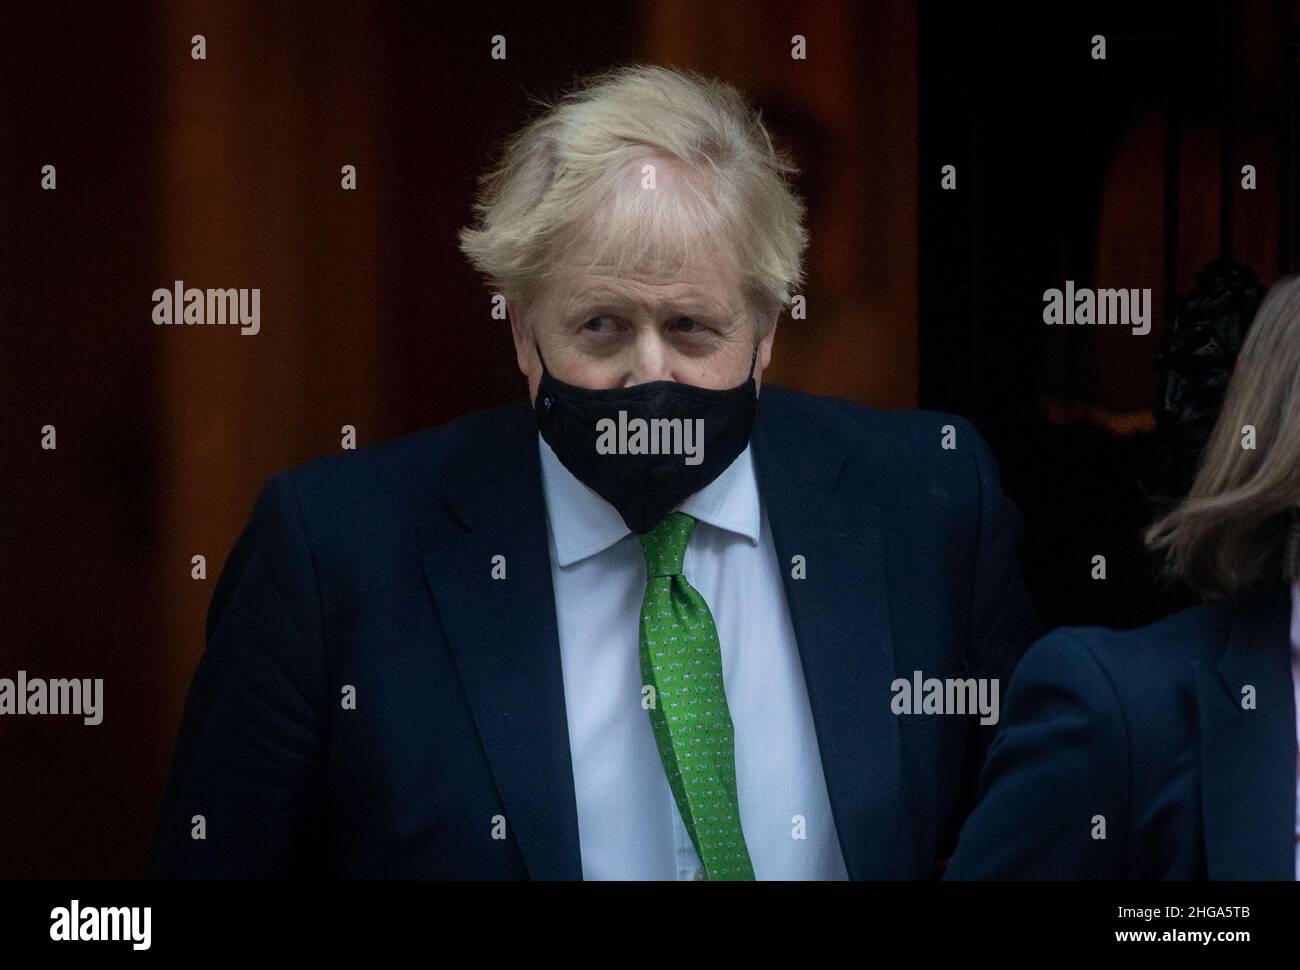 LONDON, UK JAN 19TH. Prime Minister Boris Johnson leaves Number 10 Downing Street For PMQs as he continues to face backlash and calls for his resignation following the Downing Street Partygate scandal on Wednesday 19th January 2022. (Credit: Lucy North | MI News) Credit: MI News & Sport /Alamy Live News Stock Photo